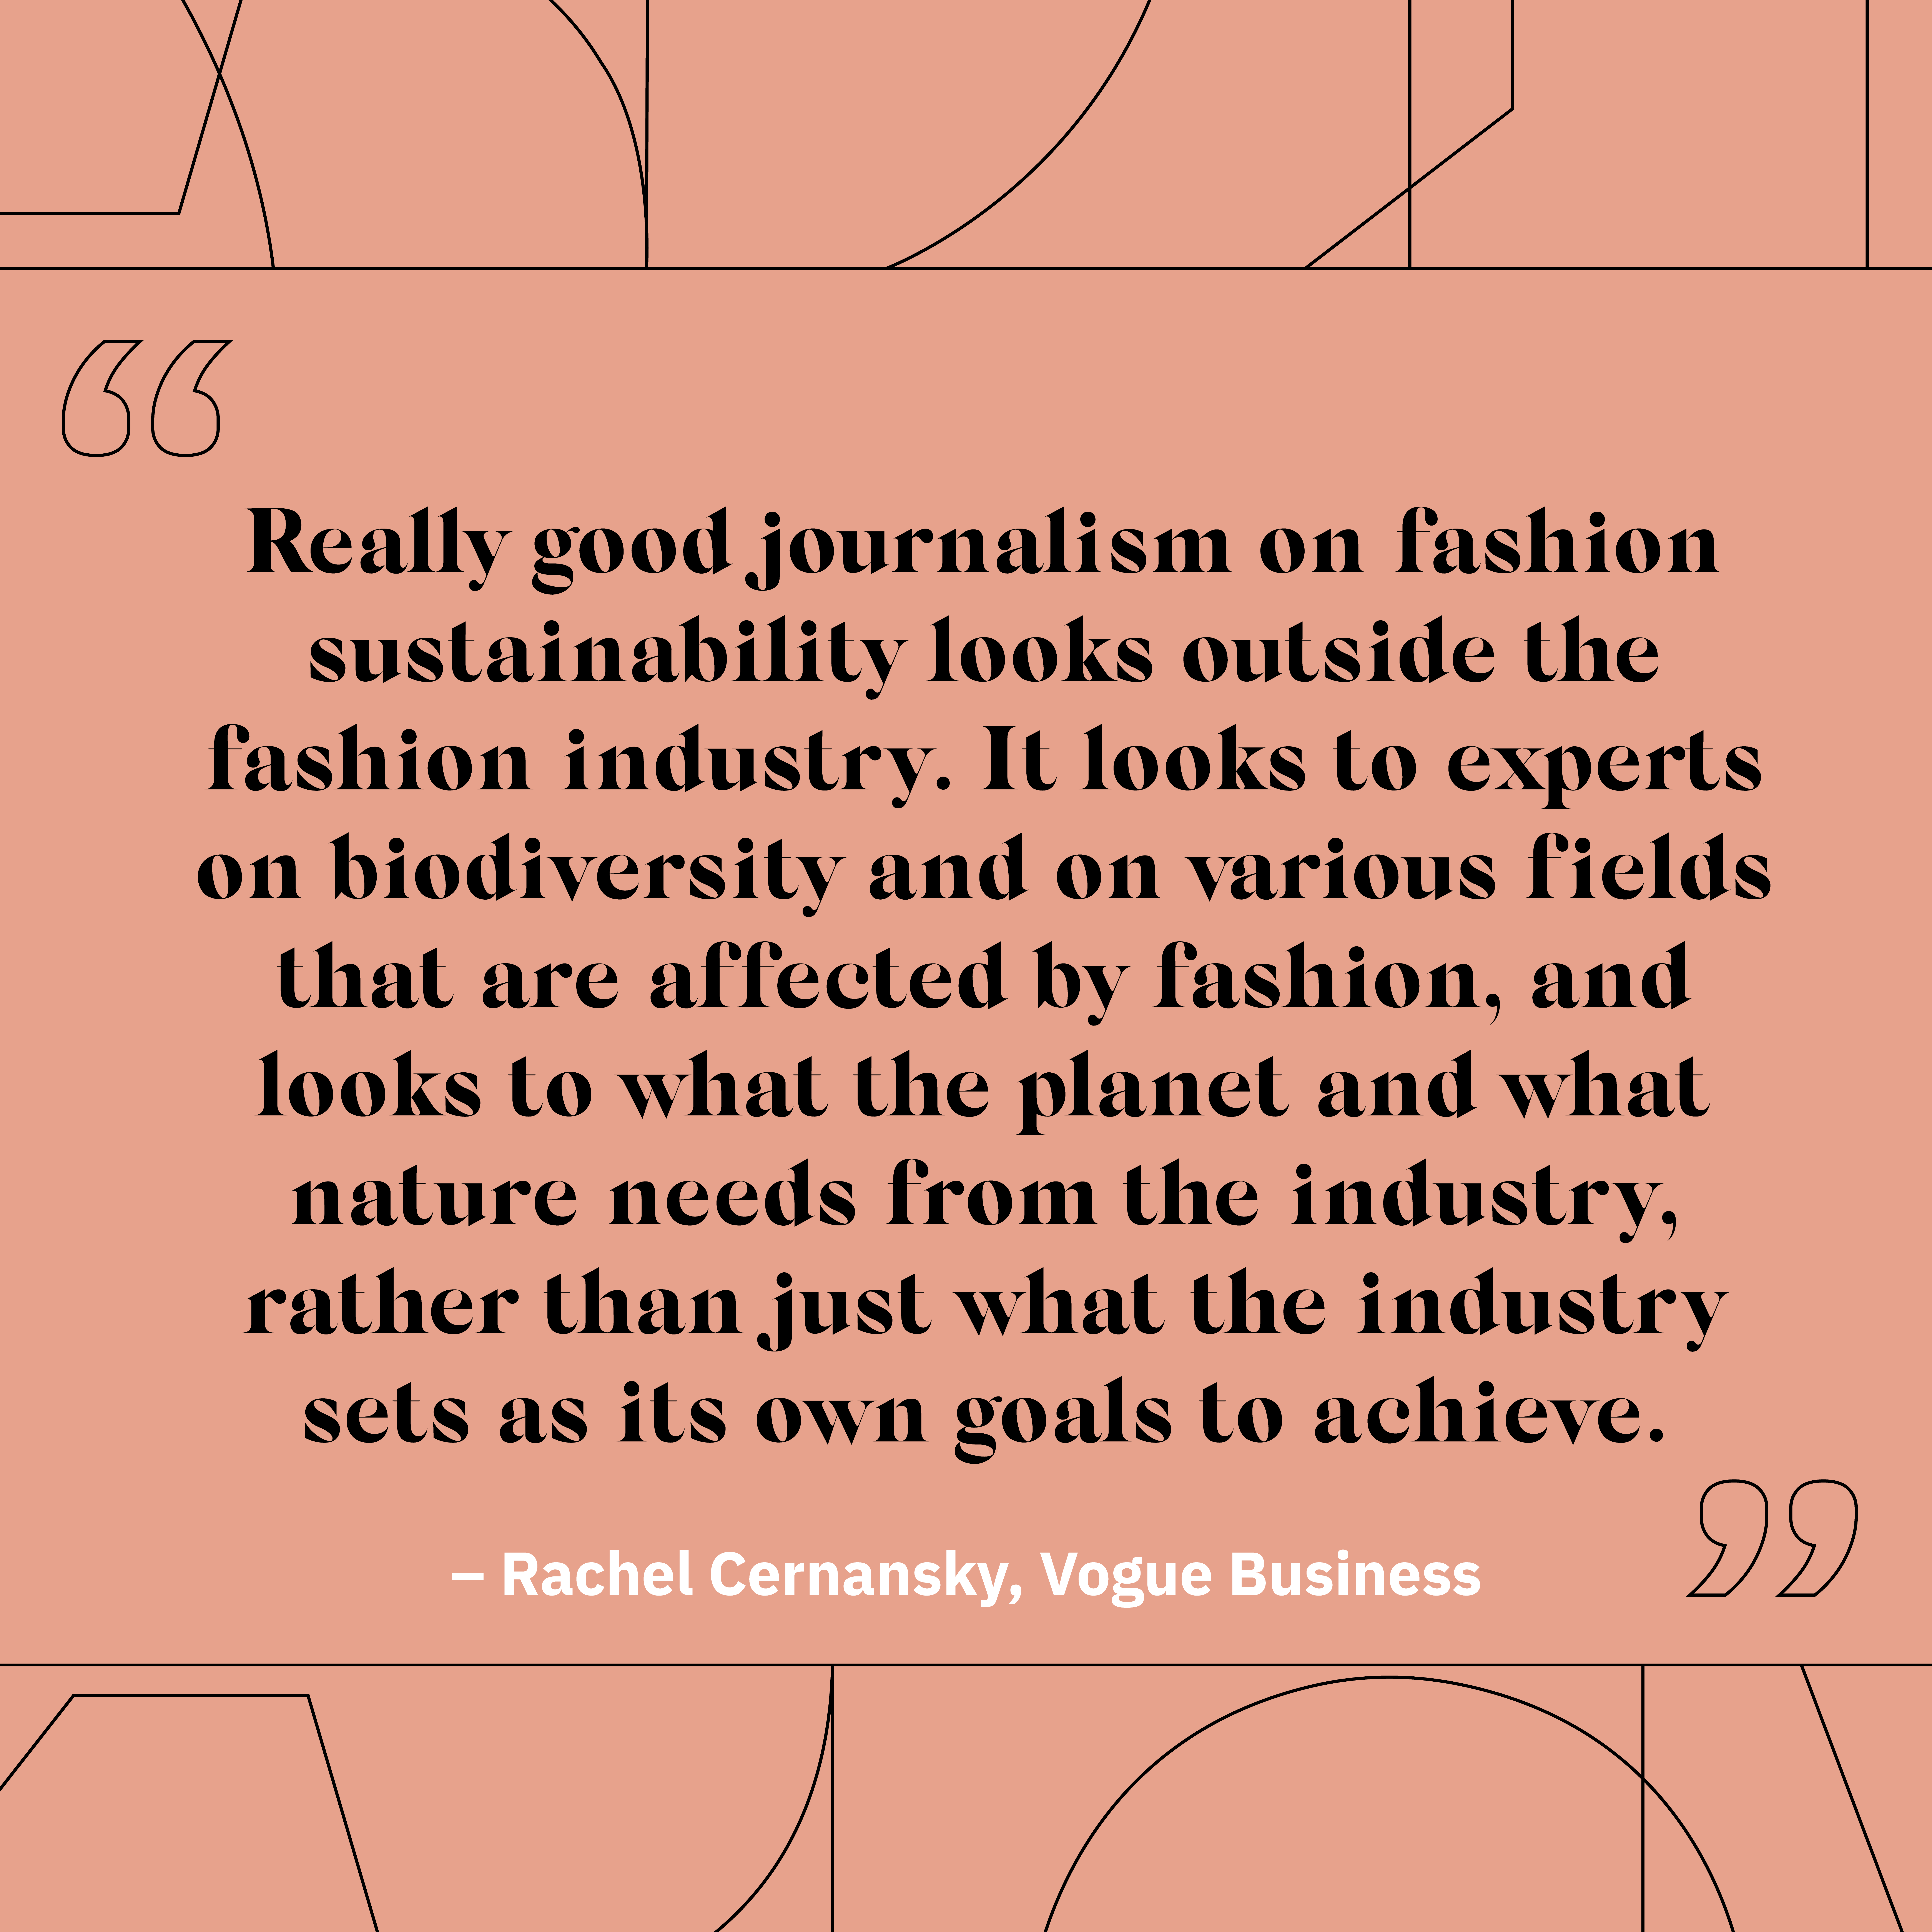 “Really good journalism on fashion sustainability looks outside the fashion industry. It looks to experts on biodiversity and on various fields that are affected by fashion, and looks to what the planet and what nature needs from the industry, rather than just what the industry sets as its own goals to achieve.” 
– Rachel Cernansky, Vogue Business 